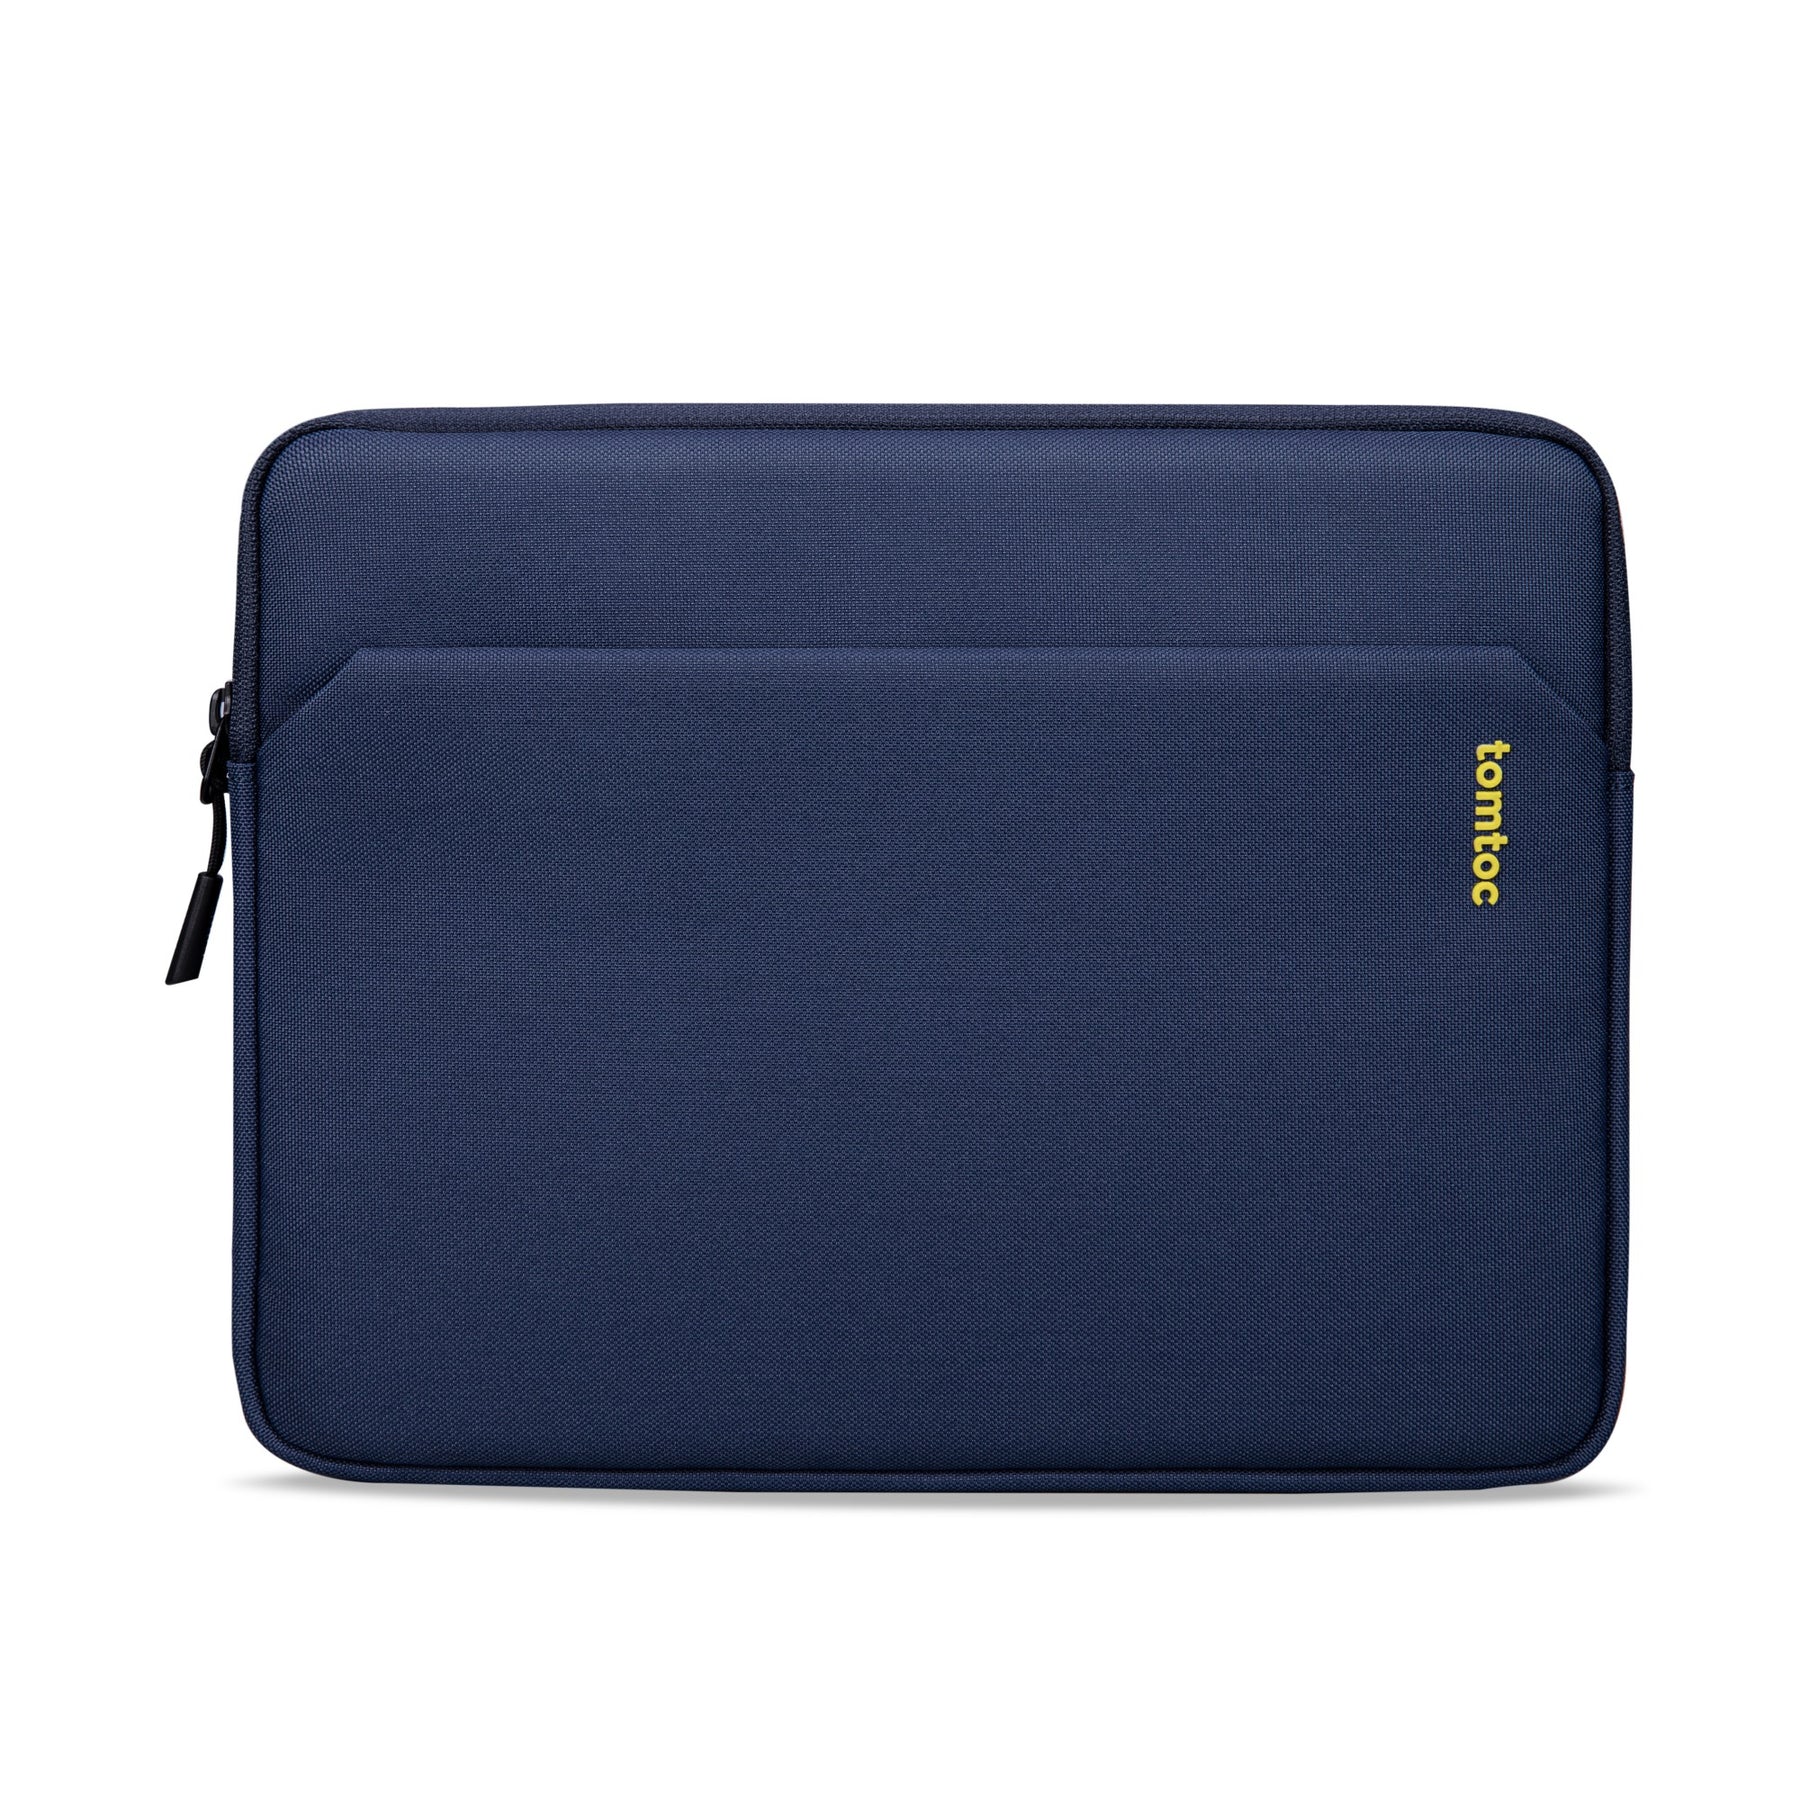 Personalised Laptop Sleeve Case Bag for MacBook Air/Pro13/15/15.6/16 inch |  eBay